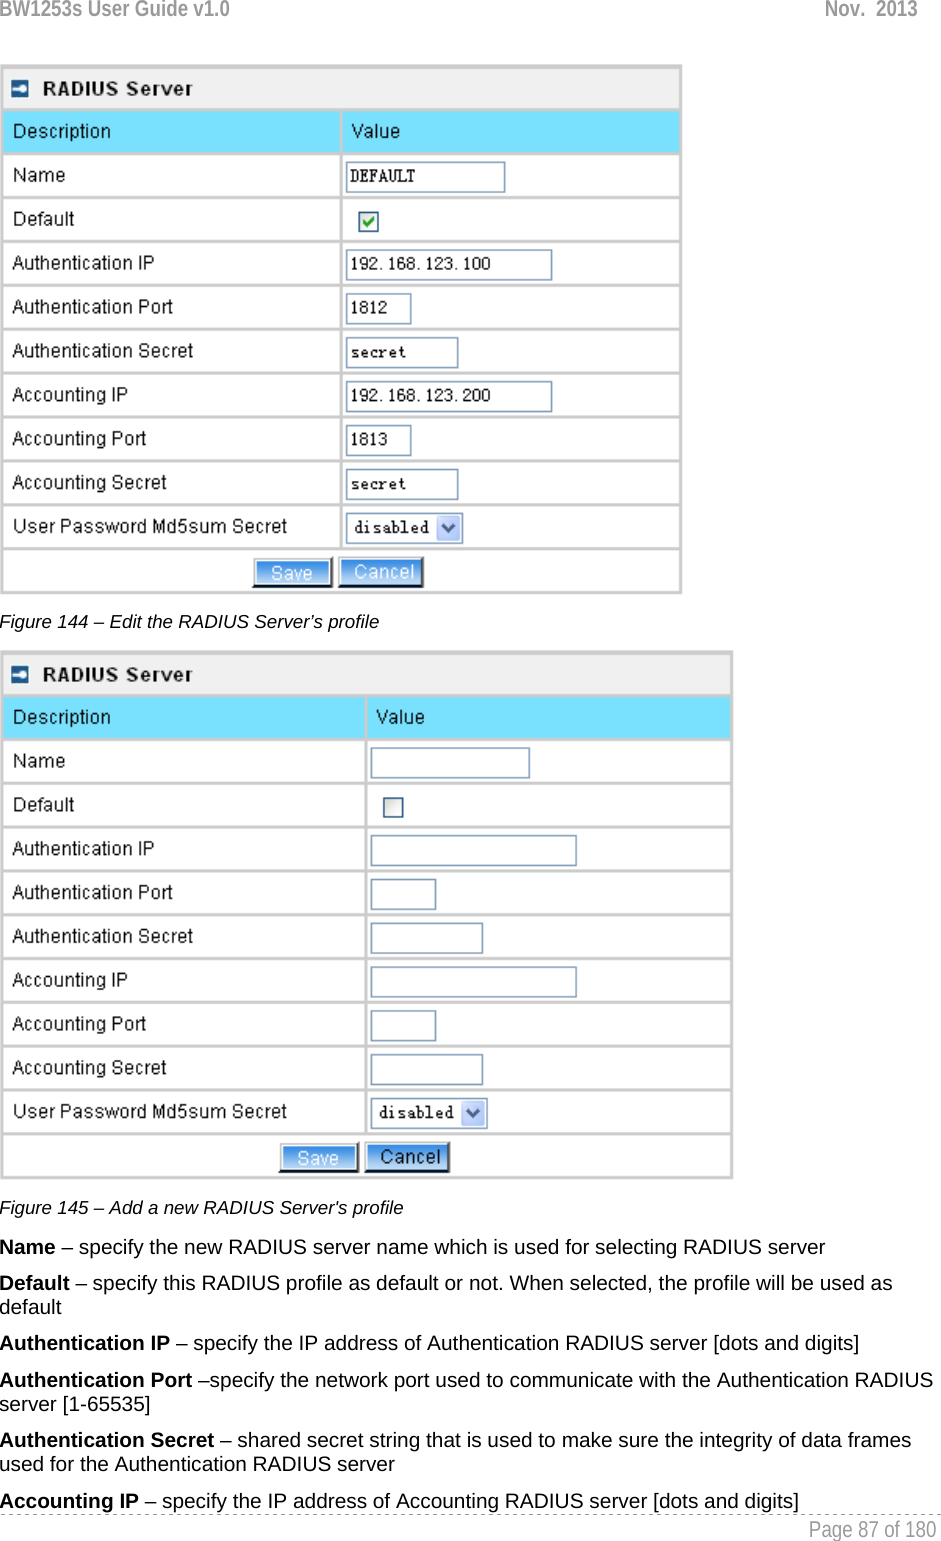 BW1253s User Guide v1.0  Nov.  2013     Page 87 of 180    Figure 144 – Edit the RADIUS Server’s profile  Figure 145 – Add a new RADIUS Server&apos;s profile Name – specify the new RADIUS server name which is used for selecting RADIUS server Default – specify this RADIUS profile as default or not. When selected, the profile will be used as default Authentication IP – specify the IP address of Authentication RADIUS server [dots and digits] Authentication Port –specify the network port used to communicate with the Authentication RADIUS server [1-65535] Authentication Secret – shared secret string that is used to make sure the integrity of data frames used for the Authentication RADIUS server Accounting IP – specify the IP address of Accounting RADIUS server [dots and digits] 